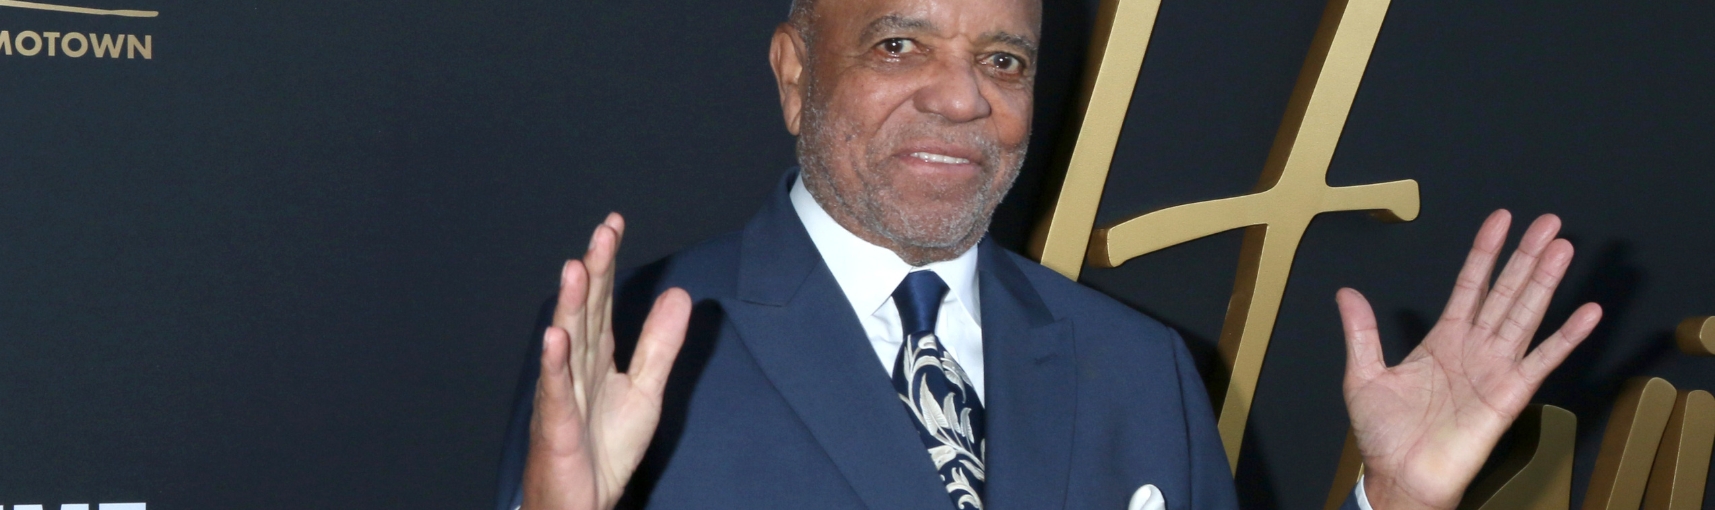 A Black man in a tuxedo smiling as he holds his hands up